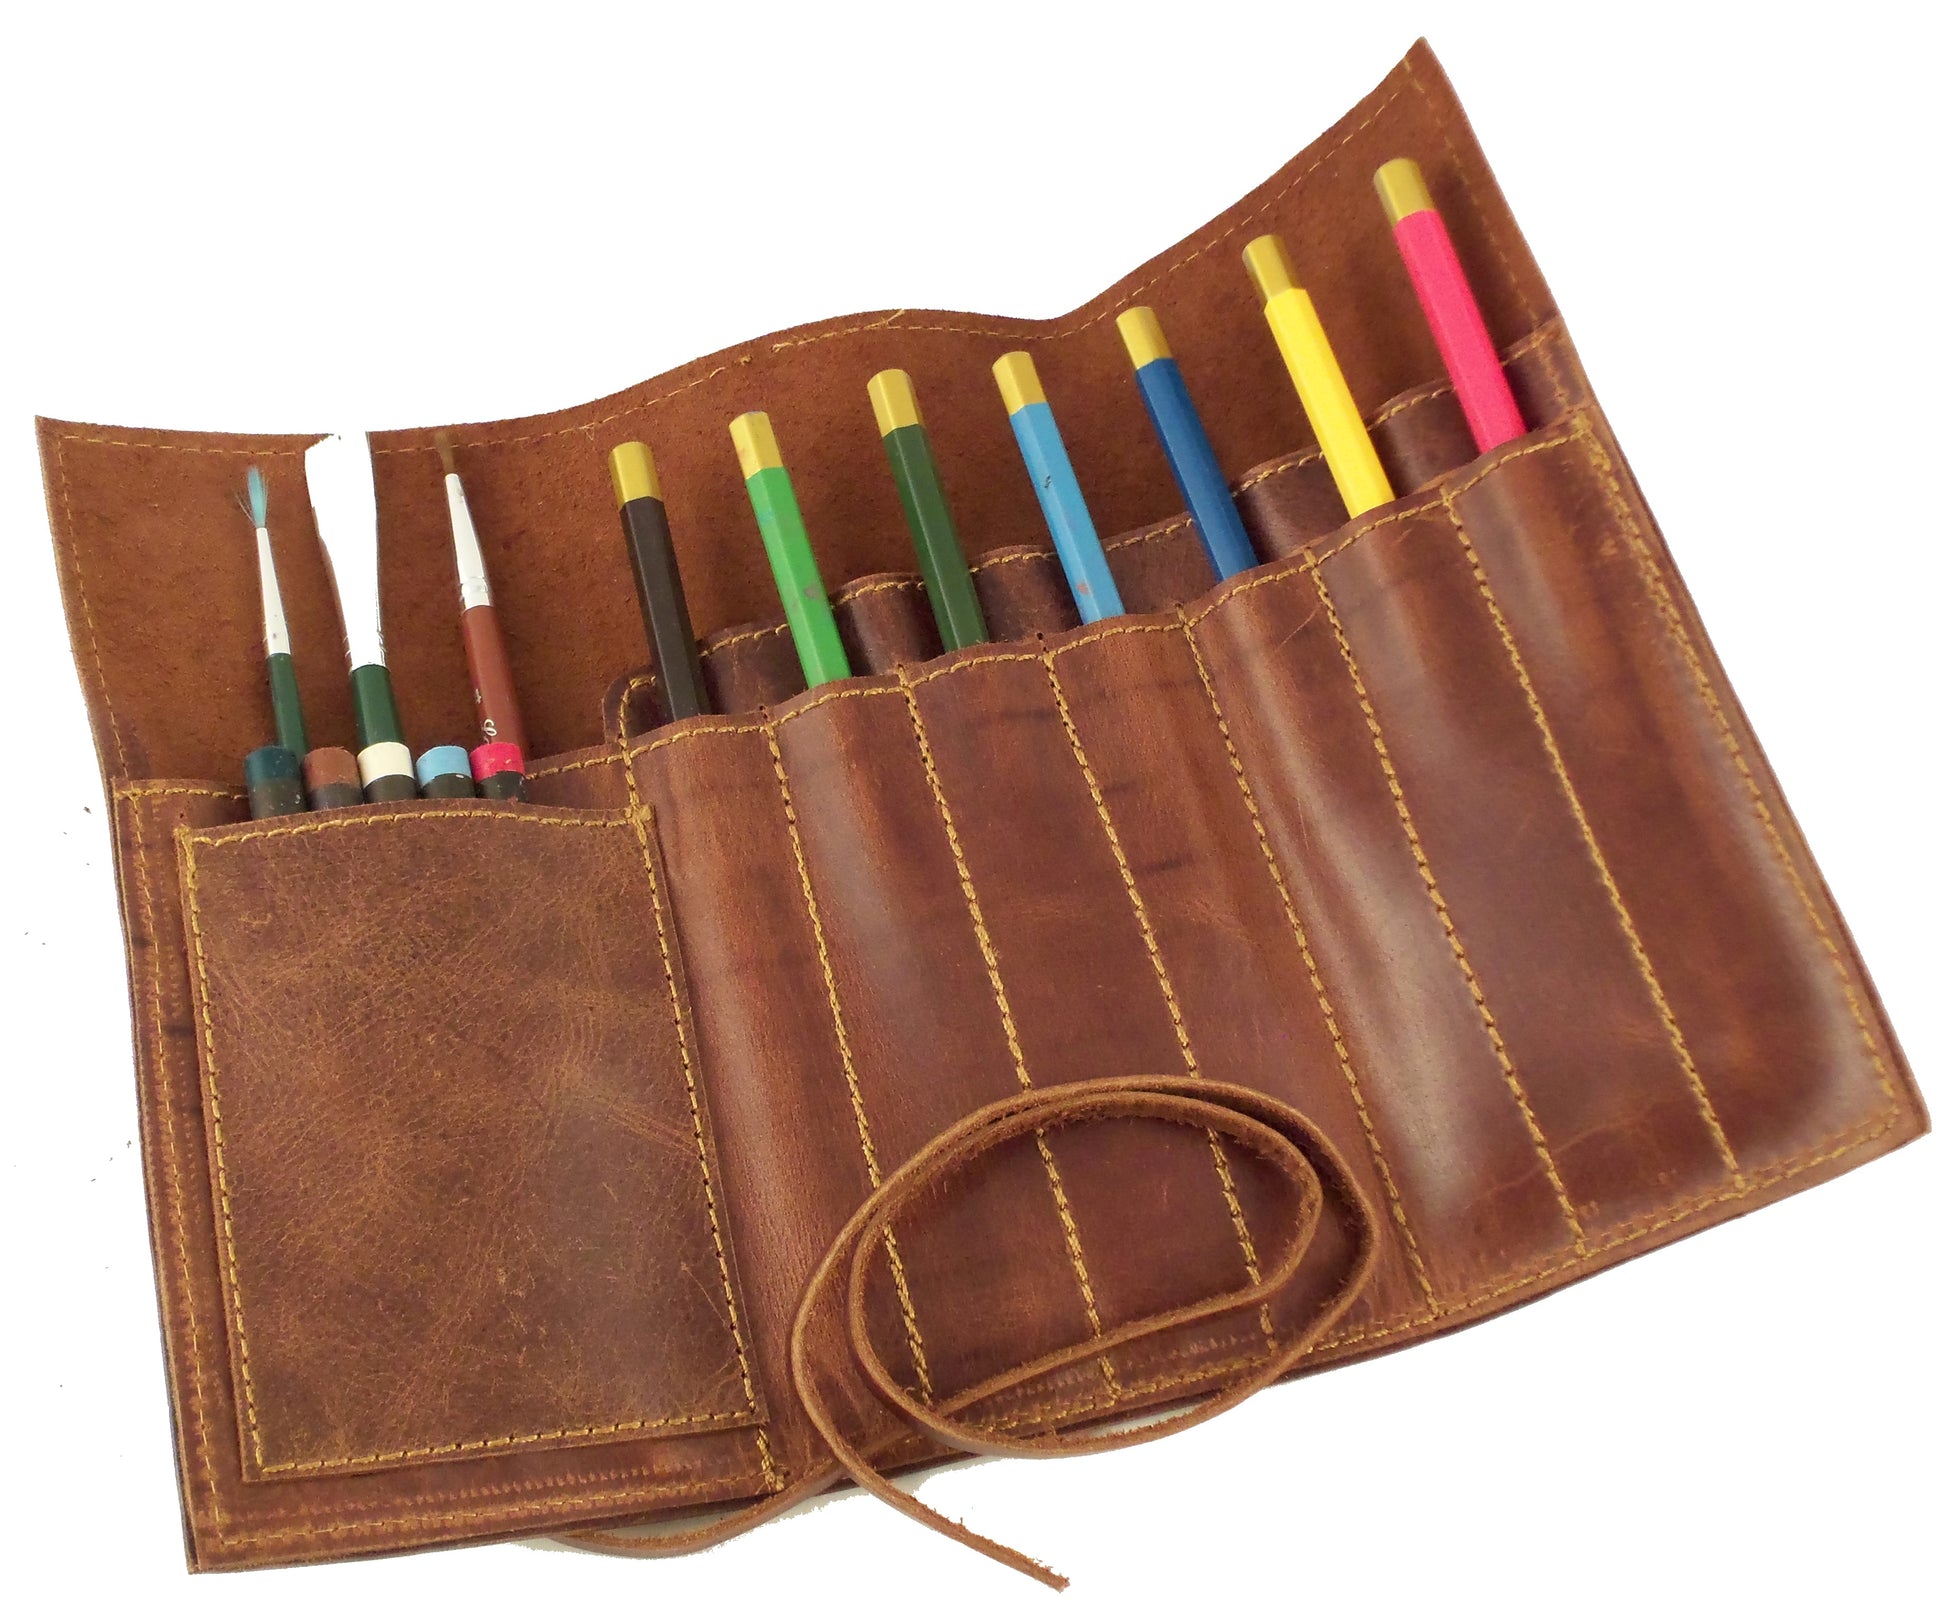 Handmade Genuine Leather Pen Pouch Vintage Roll-up Pencil Case Bag